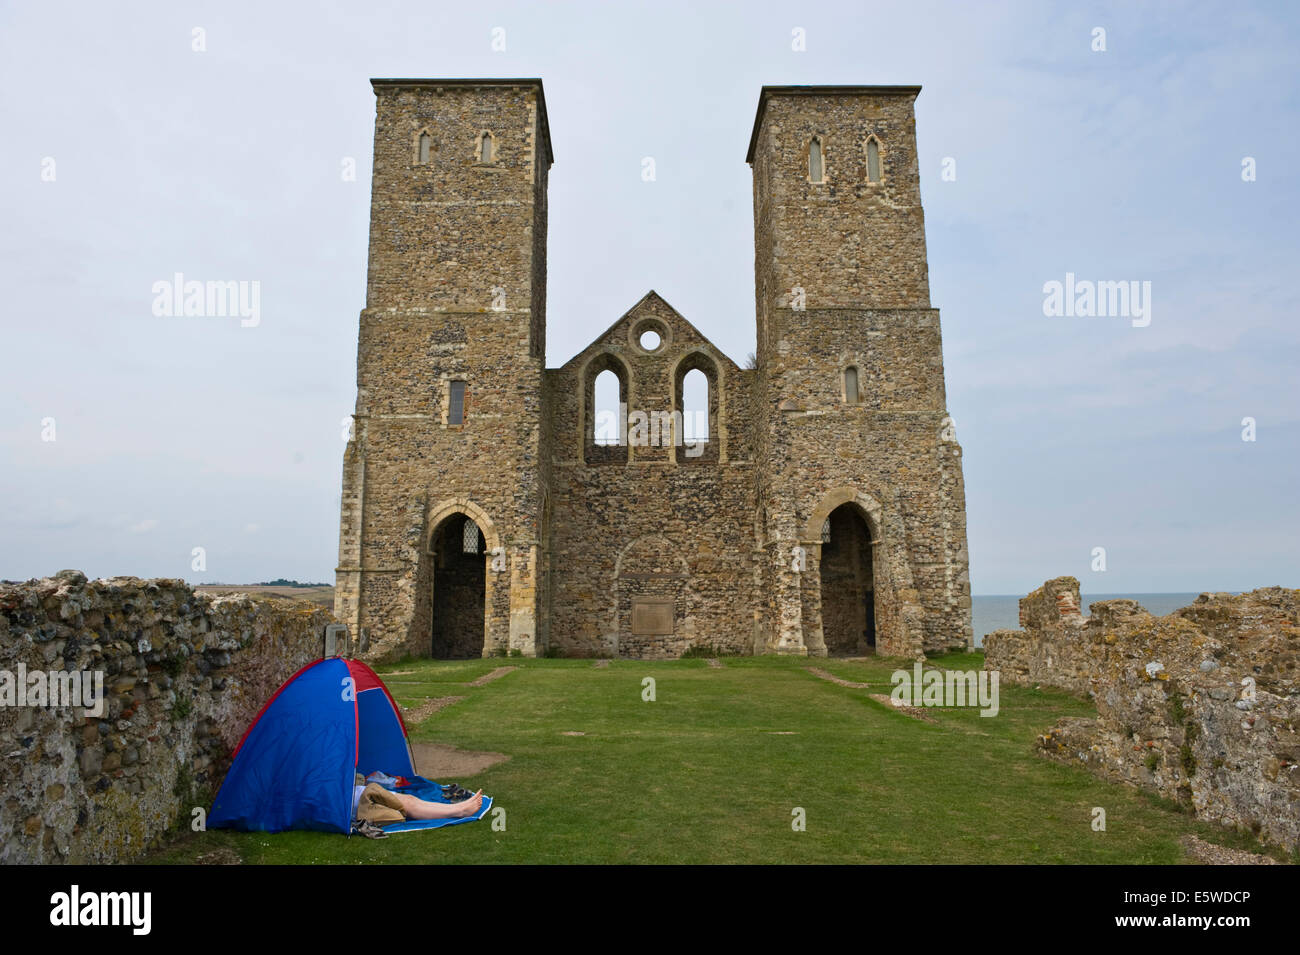 Campers at the ruined church of St Mary dating from the 7th century the towers were added in the 12th century Reculver Herne Bay Kent England UK Stock Photo